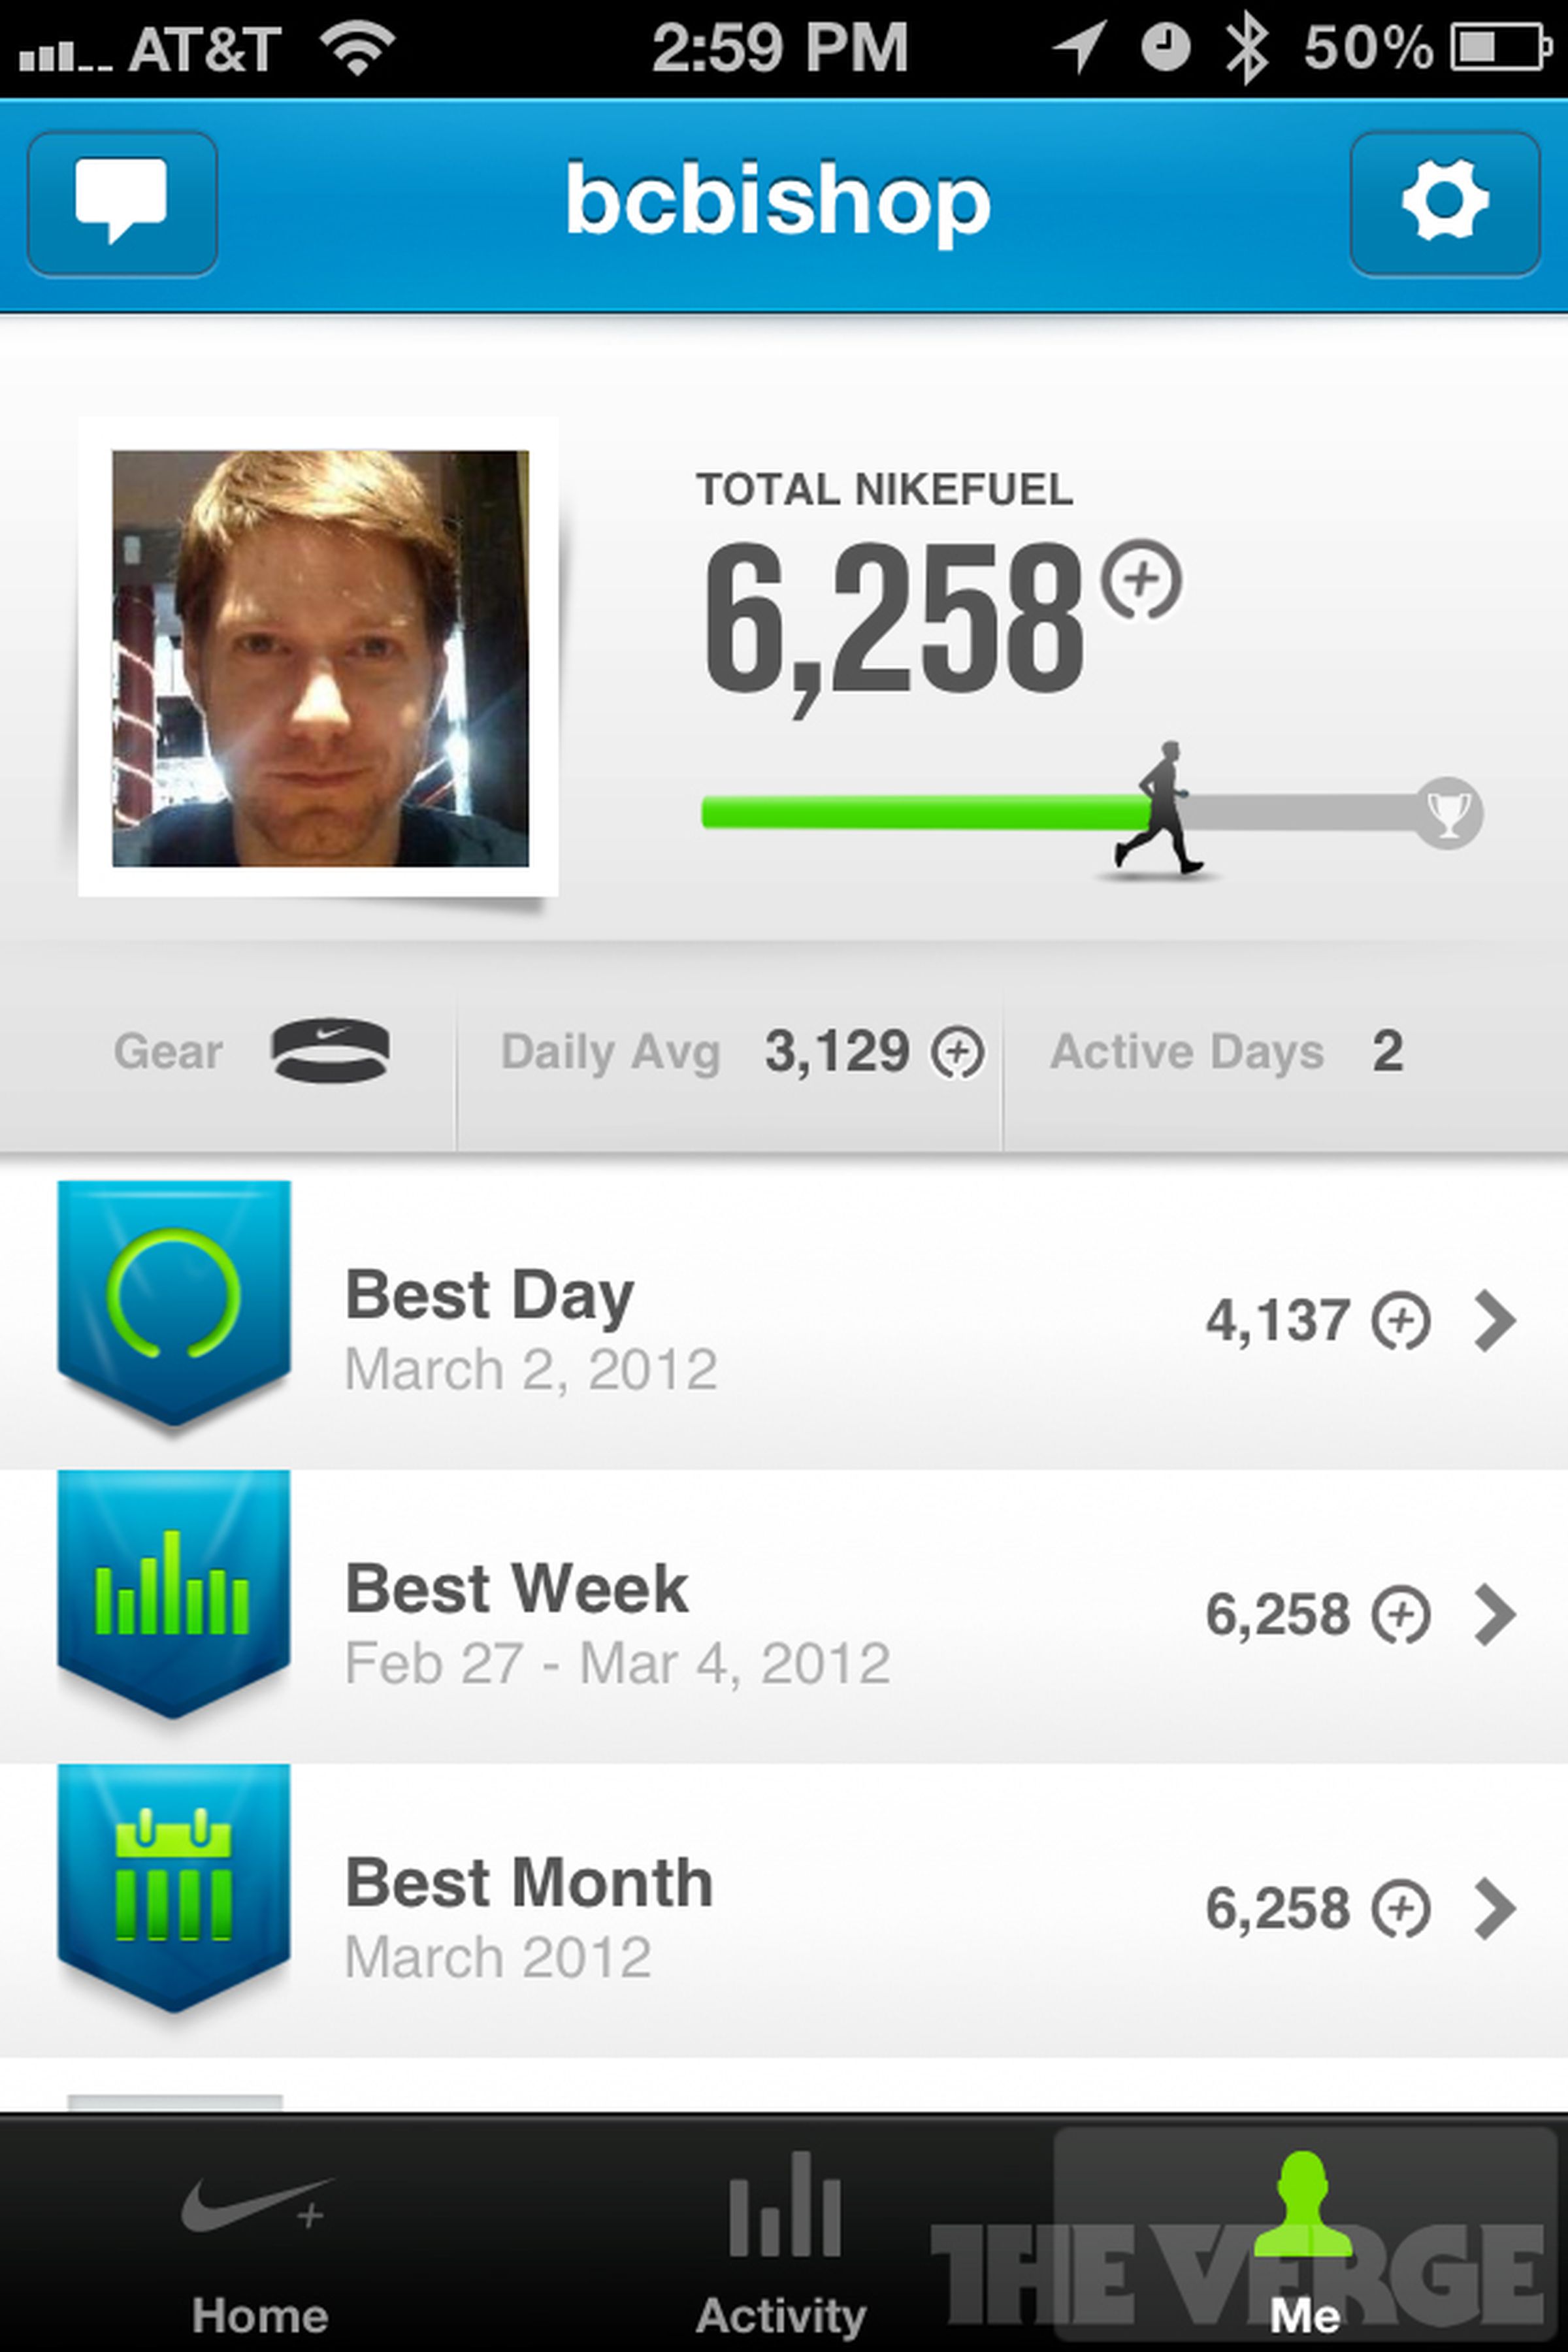 Nike+ FuelBand iOS app and website review images